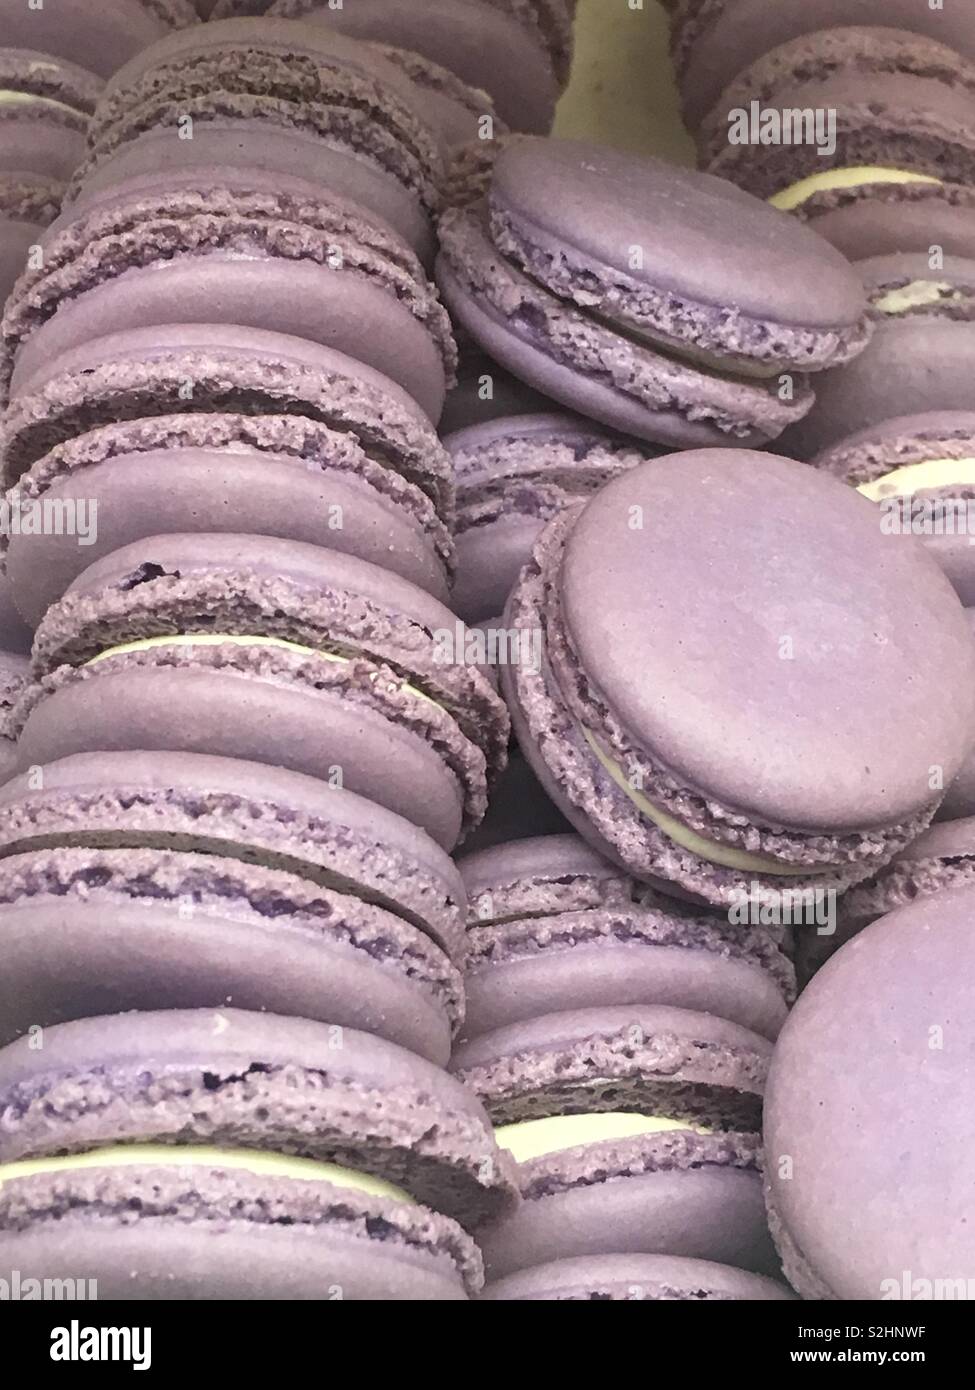 Dish full of light purple macaron cookies with white cream cookie filling as a tasty treat and delicious dessert. Stock Photo